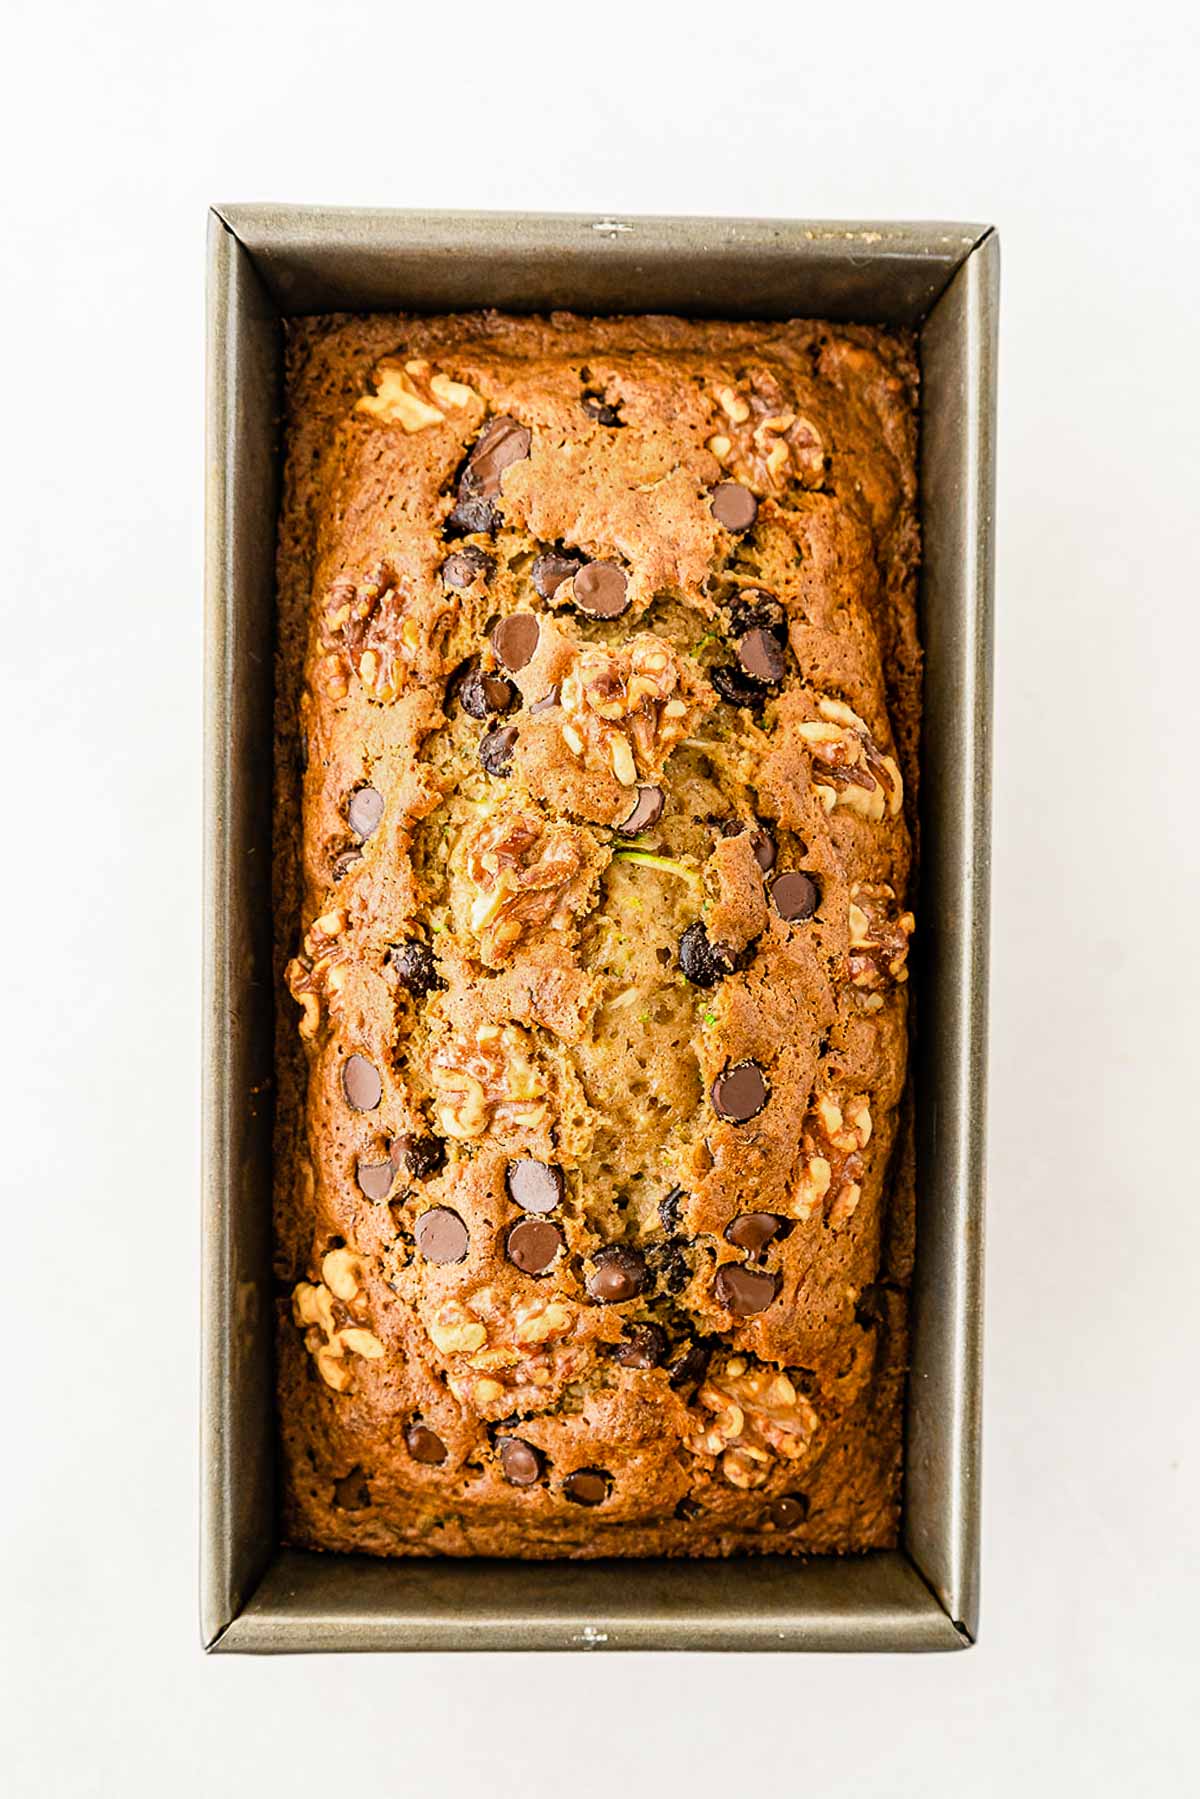 baked zucchini bread in a loaf pan